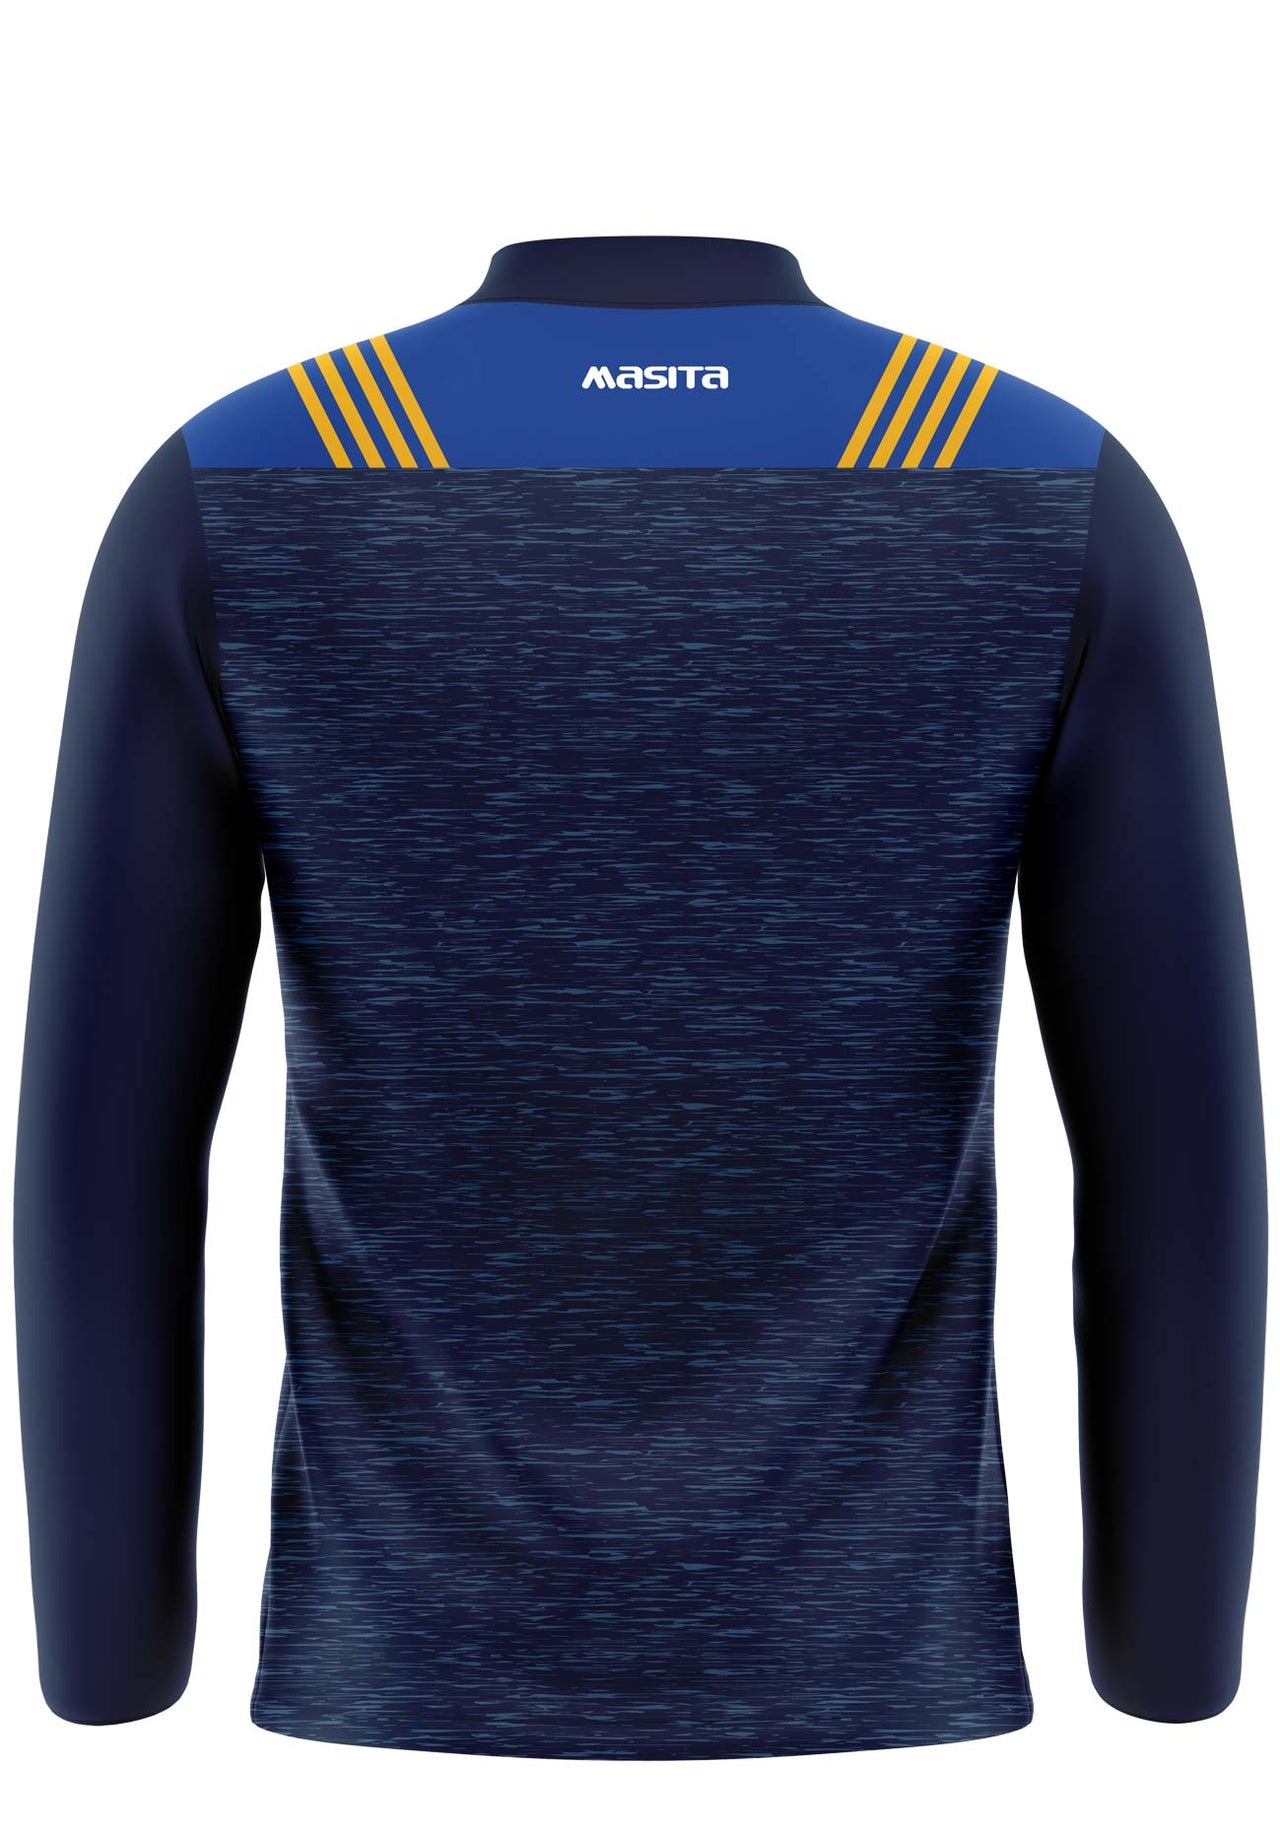 Carrigtwohill Camogie Sweater Adults